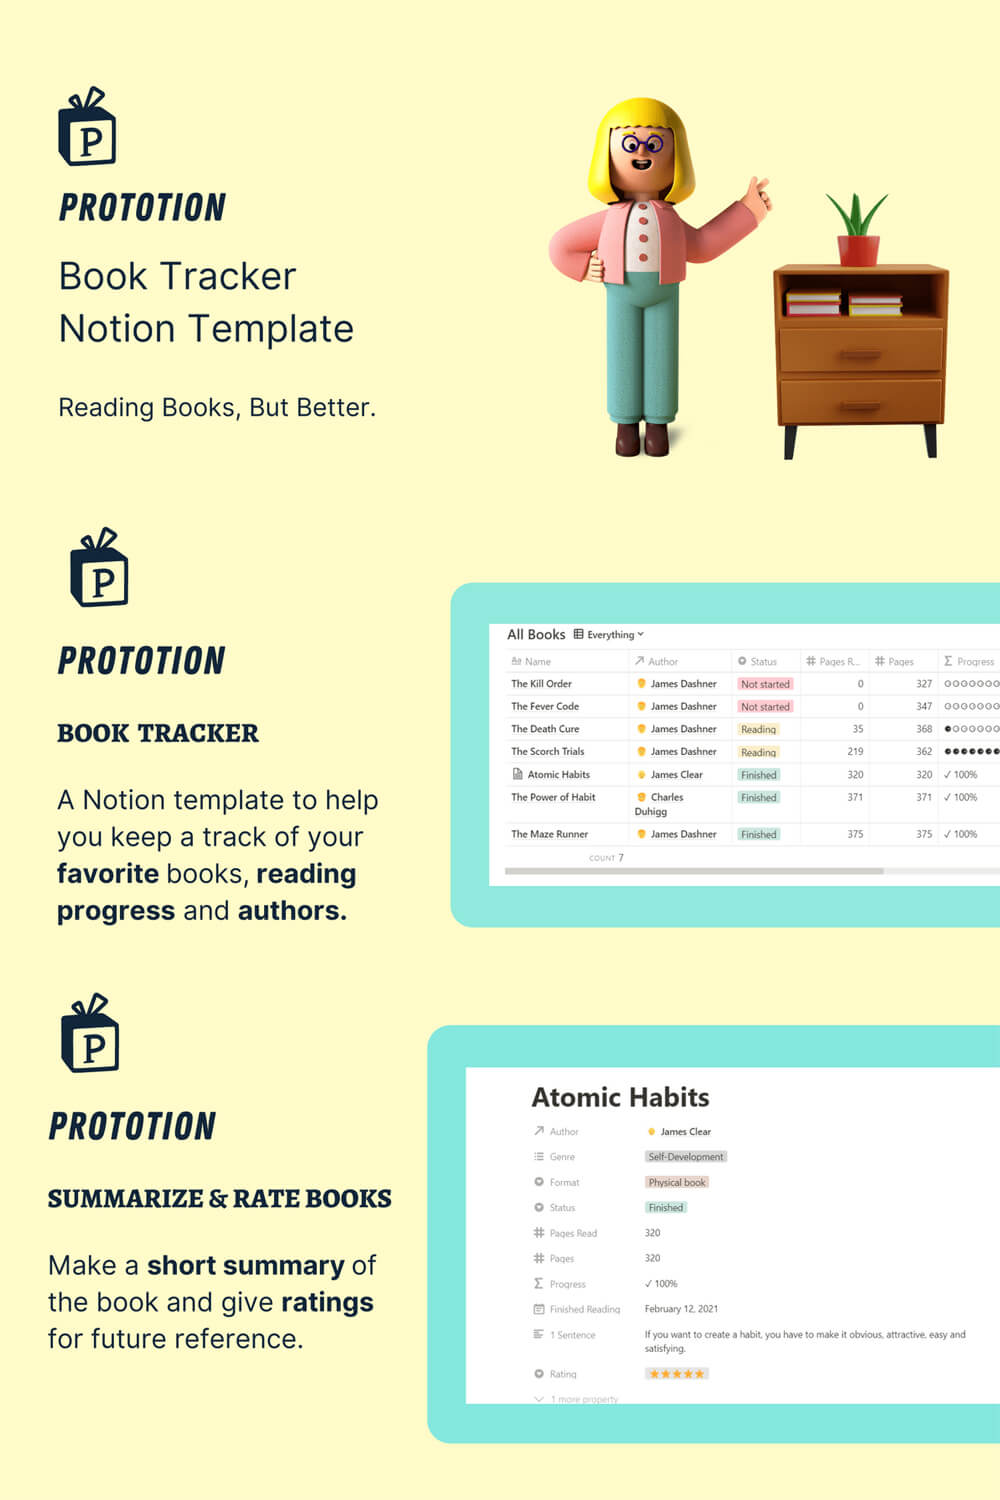 Book Tracker notion template: summarize and rate books.